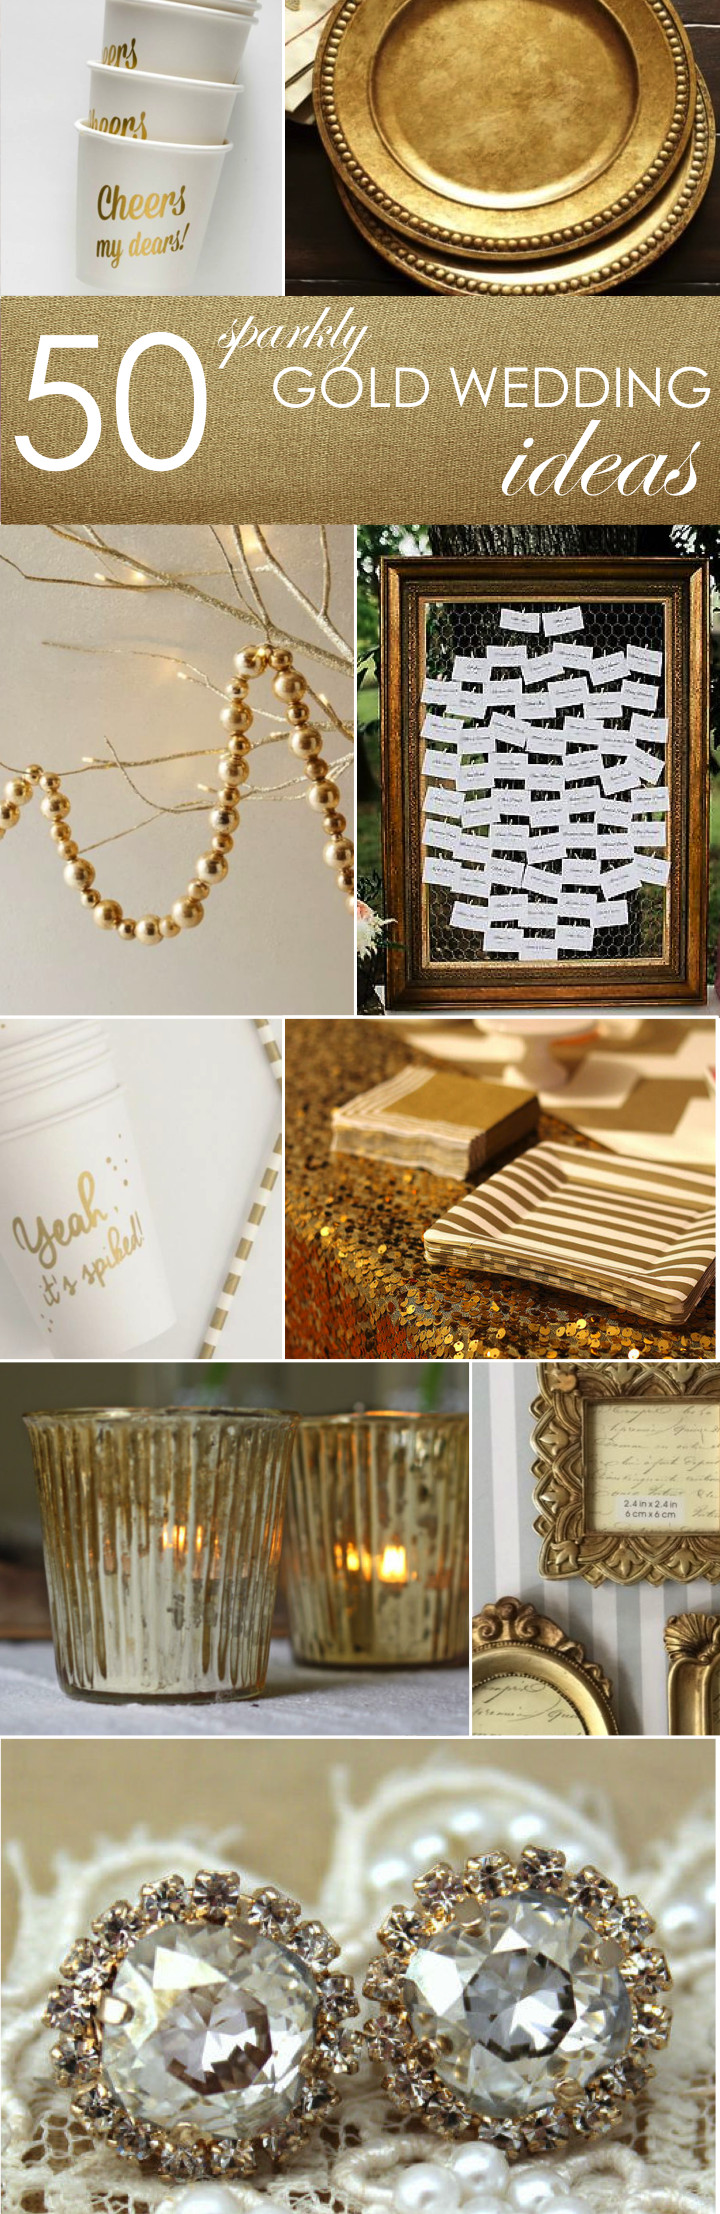 50th Wedding Anniversary Decorating Ideas
 50 Gold Ideas for Weddings Parties